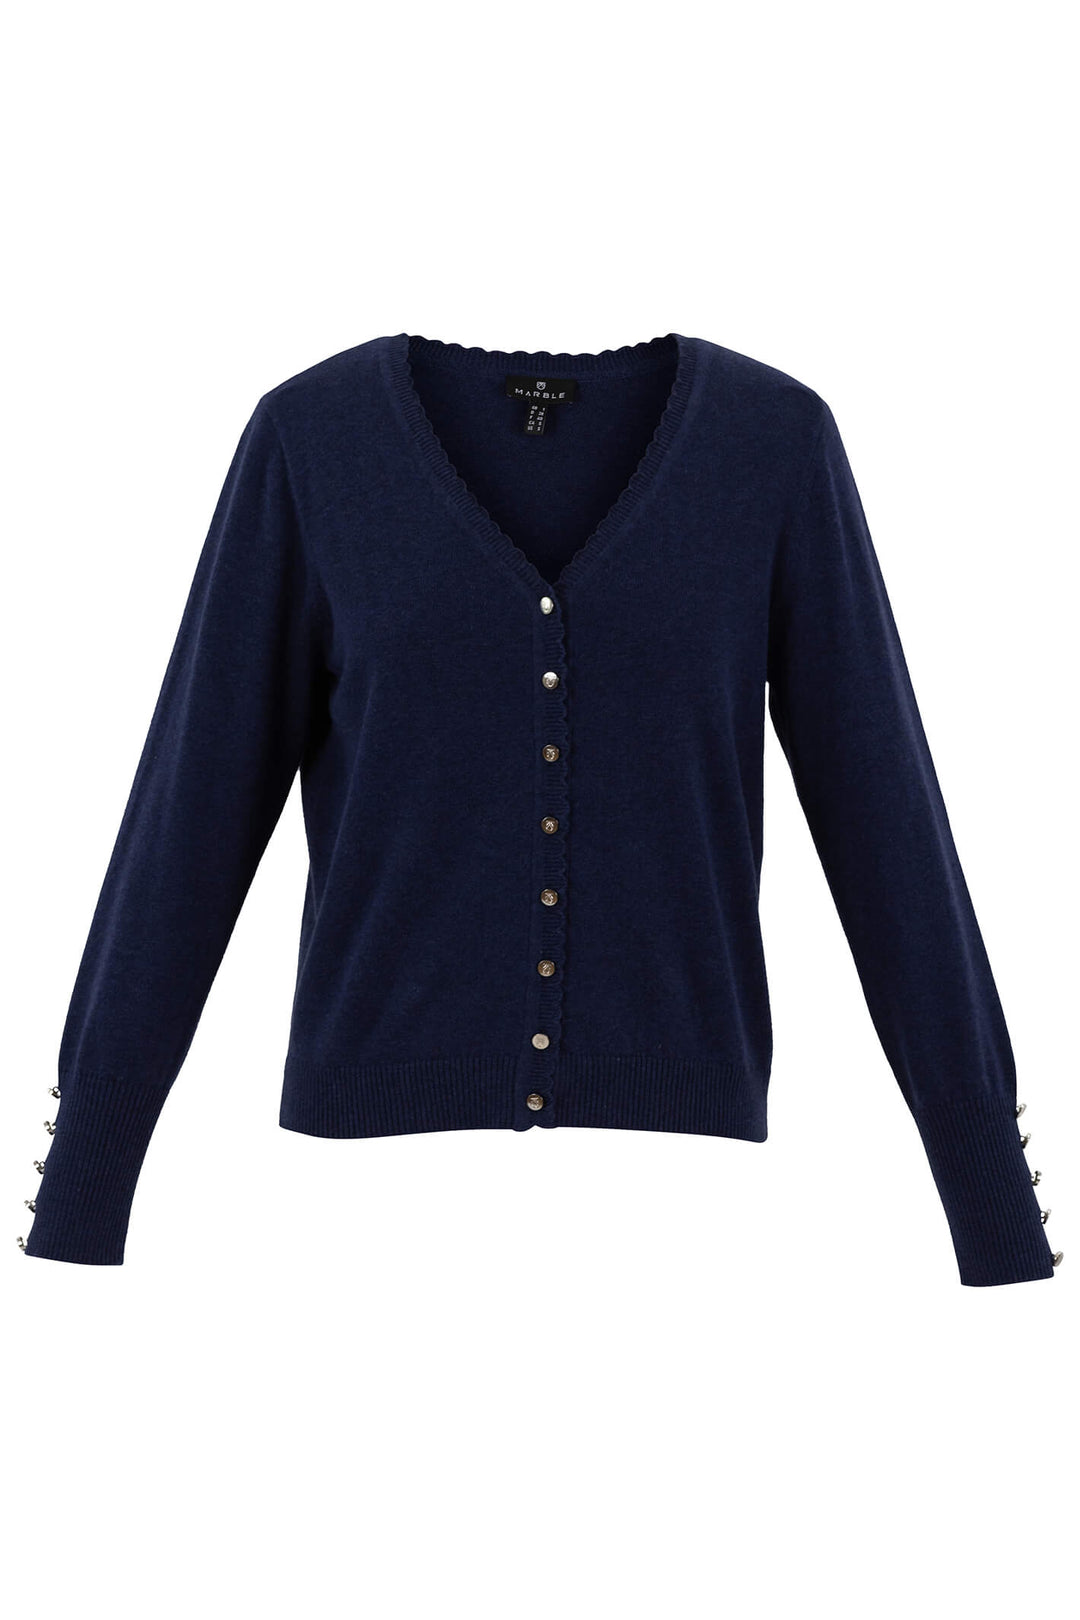 Marble Fashion 7210 103 Navy Cardigan - Experience Boutique